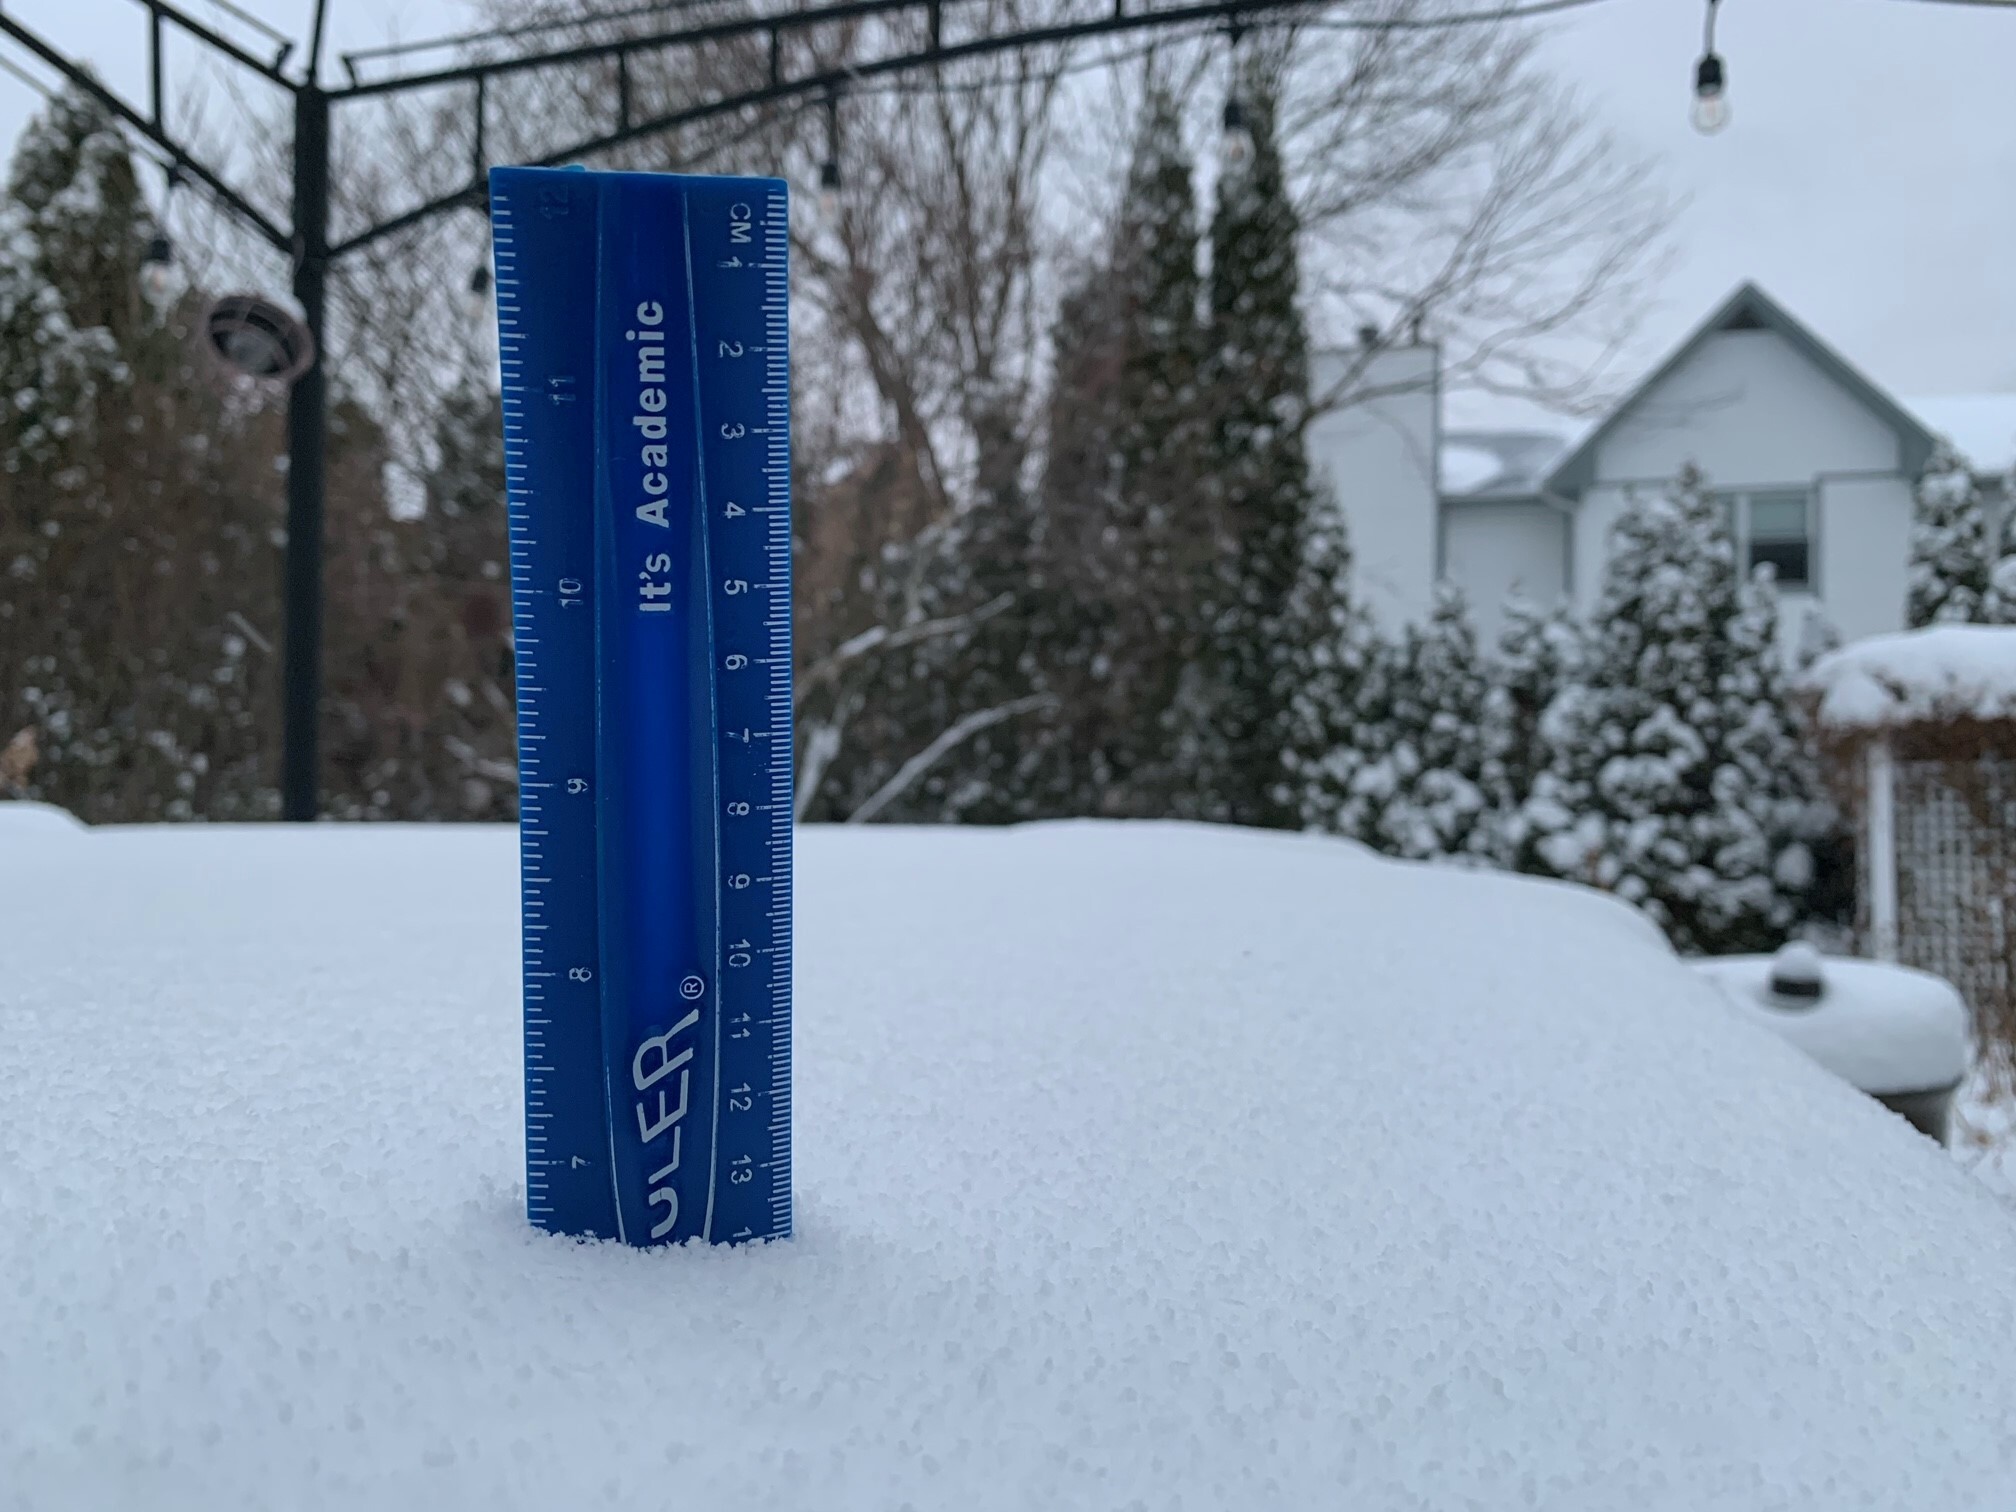 chicago snow totals january 20th